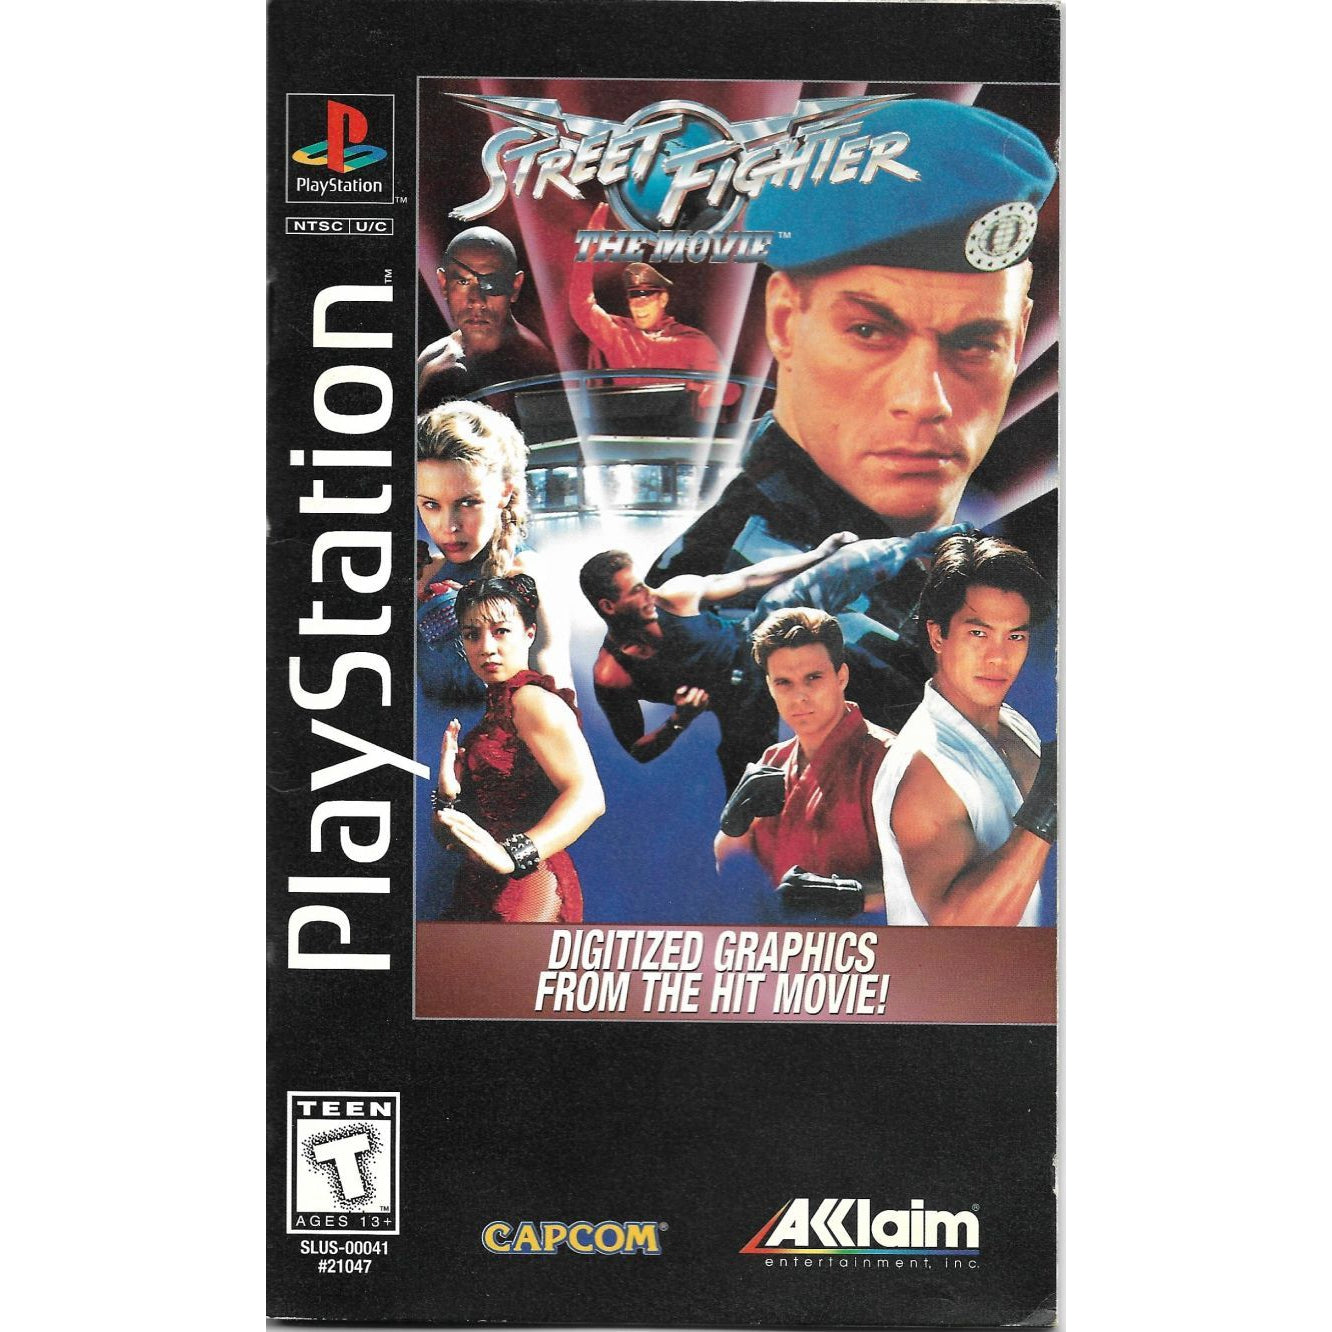 Street Fighter: The Movie (Long Box) - PlayStation 1 (PS1) Game Complete - YourGamingShop.com - Buy, Sell, Trade Video Games Online. 120 Day Warranty. Satisfaction Guaranteed.